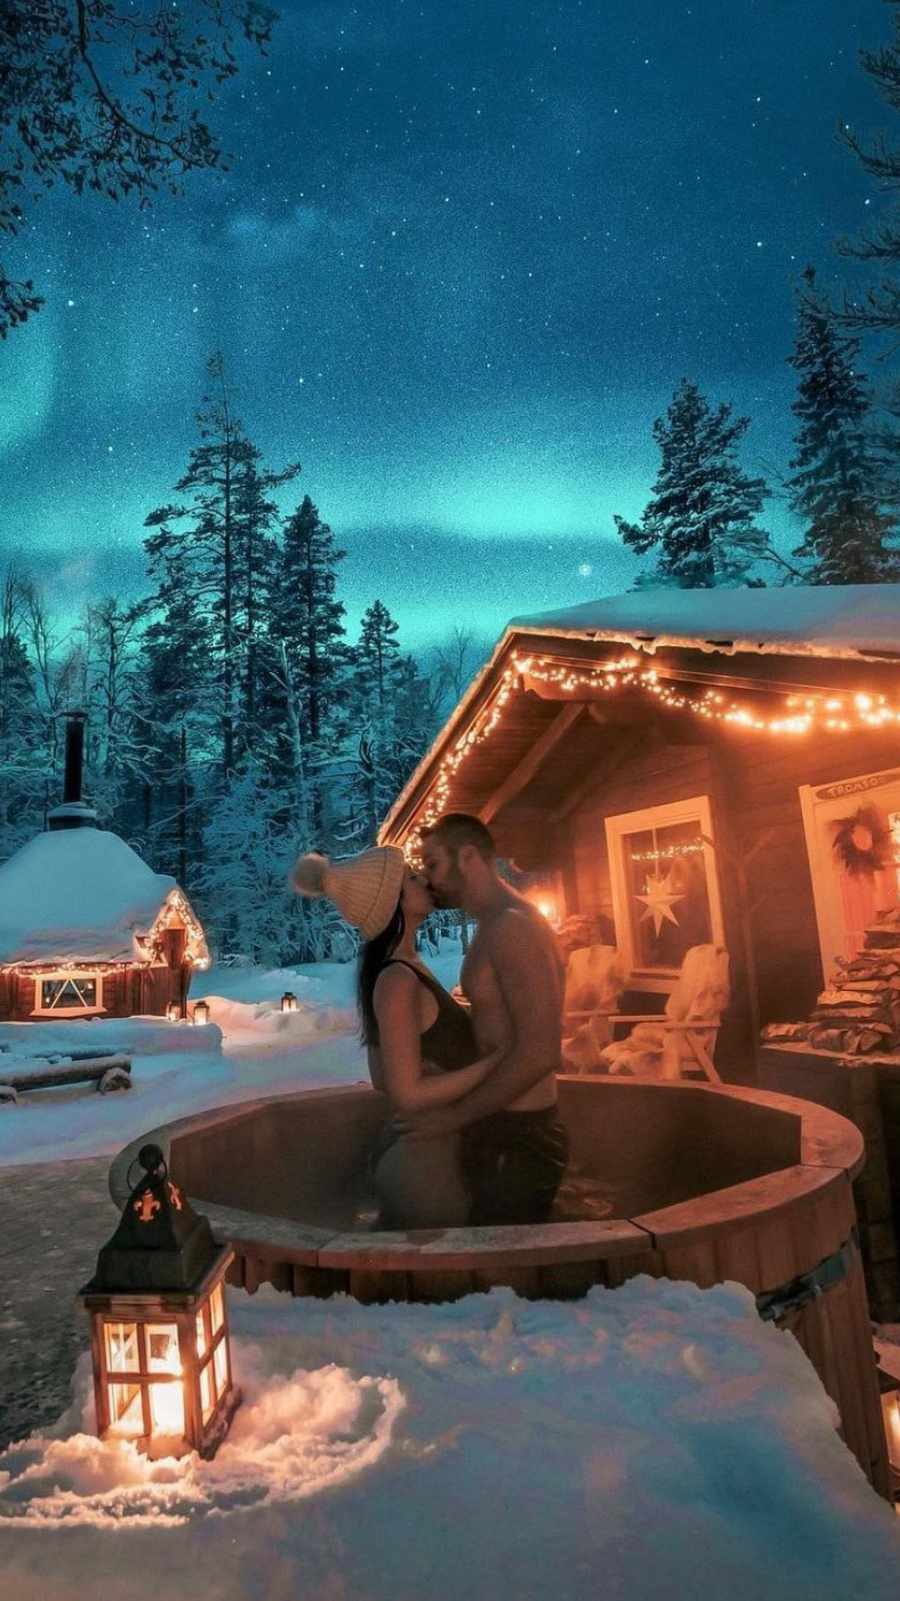 Christmas Vacation with Girlfriend iPhone Wallpaper